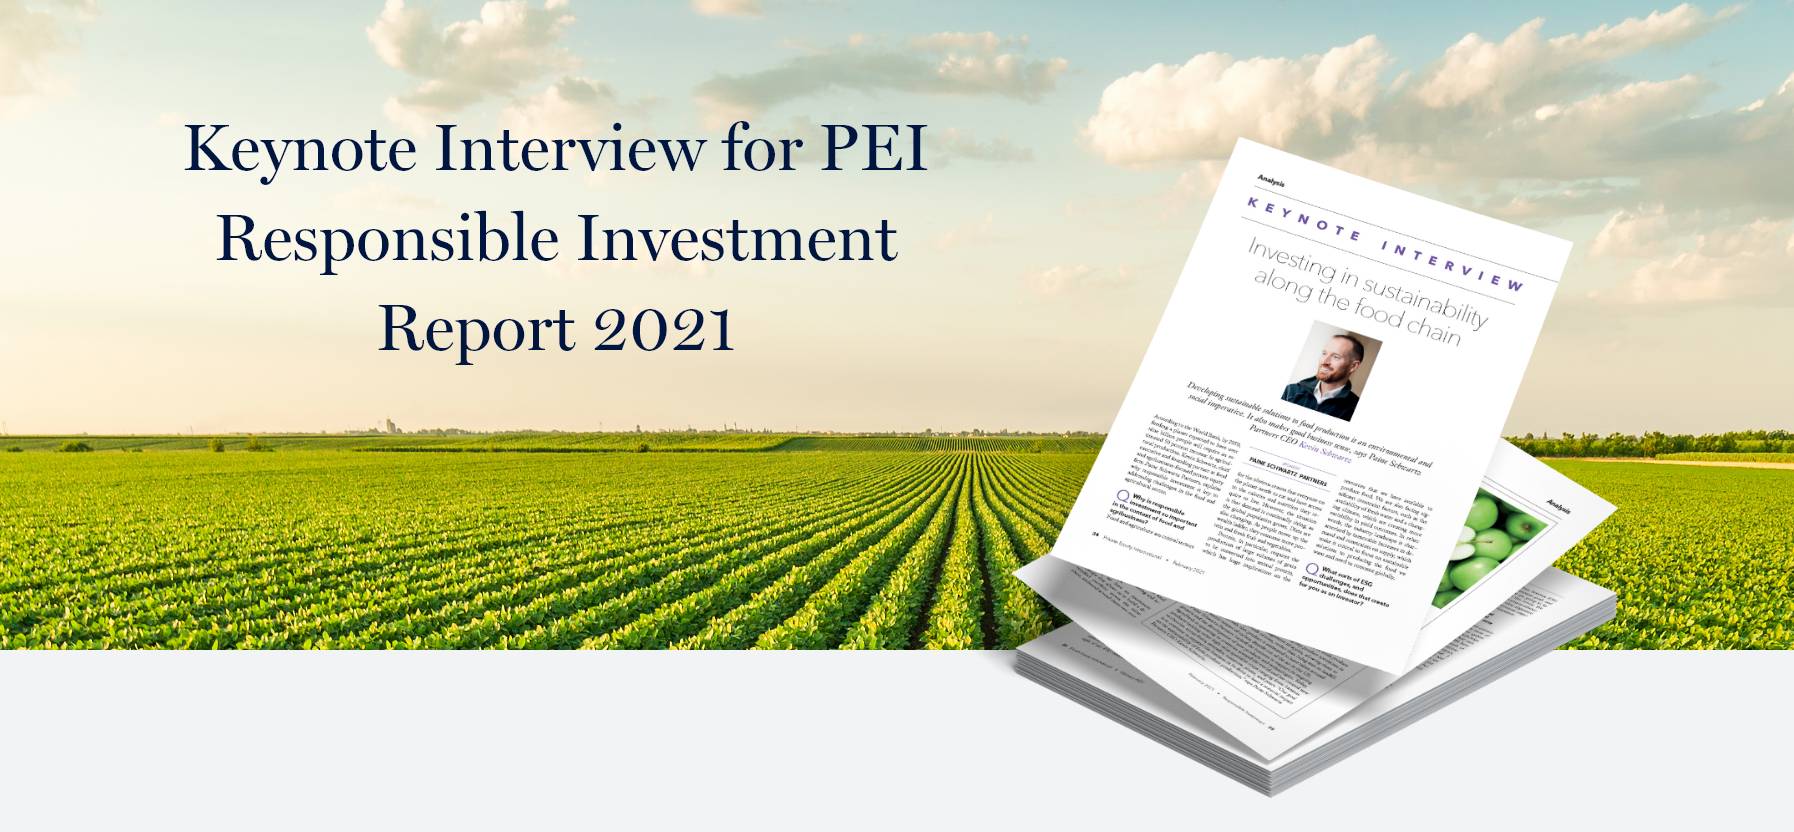 Paine Schwartz Partners – Keynote Interview for PEI Responsible Investment Report 2021@2x